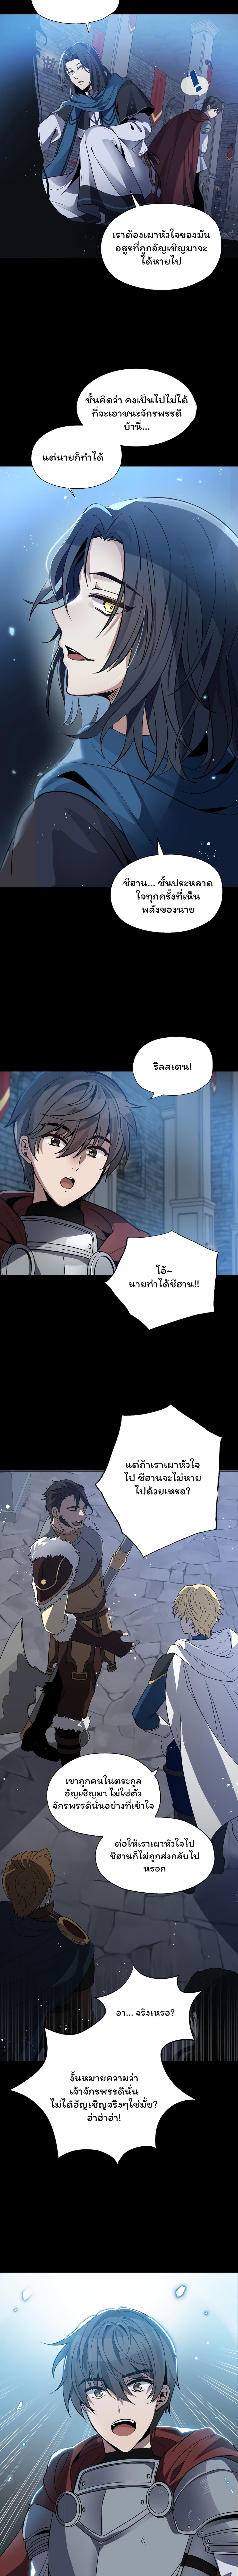 Re entering Another World ตอนที่ 1 09